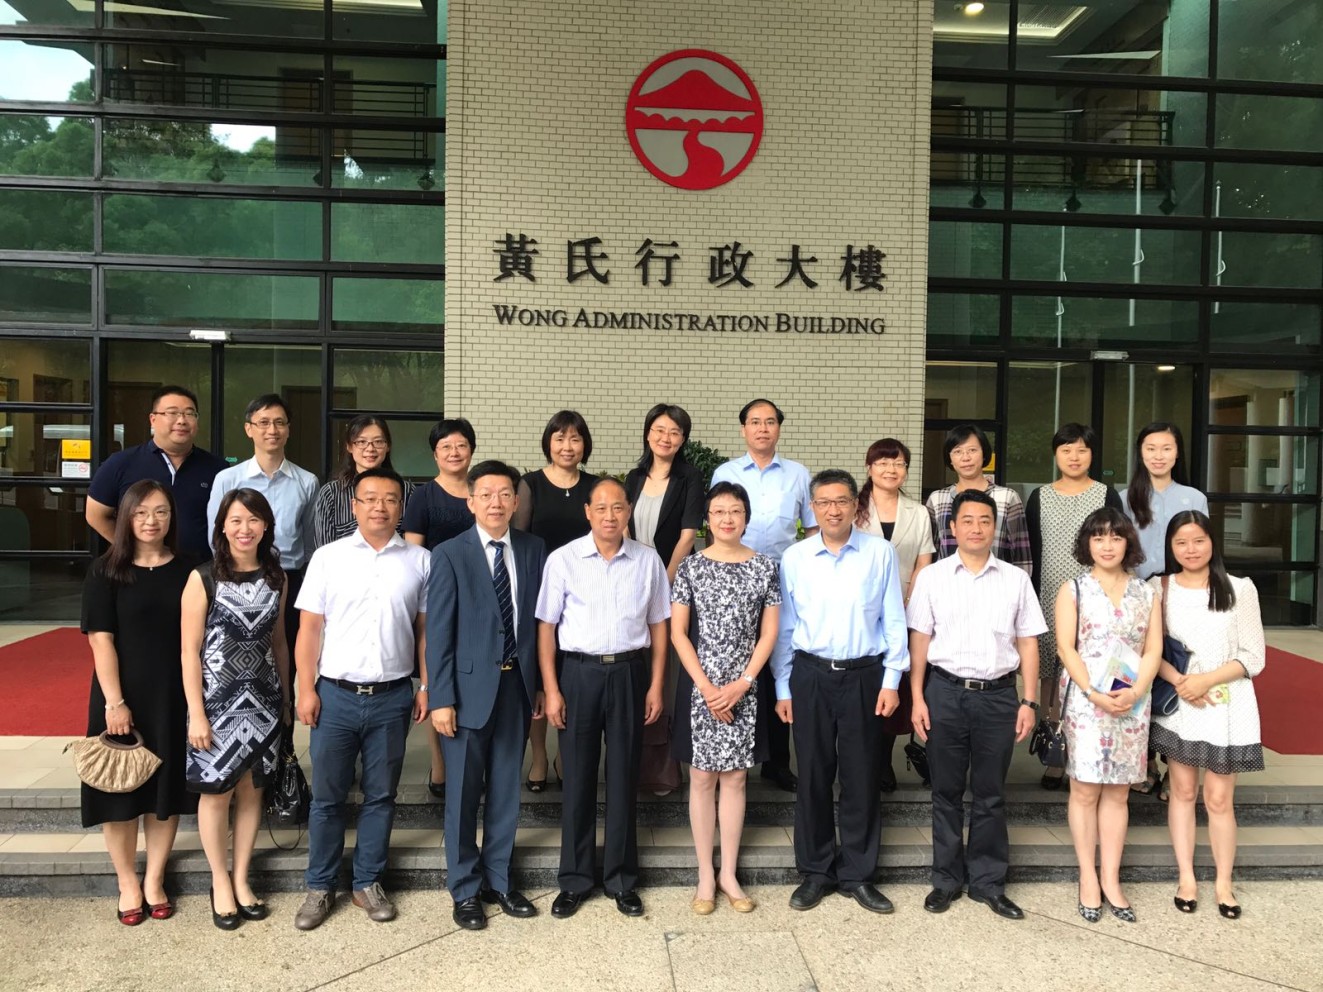 Delegation of universities in Nanjing visits Lingnan to discuss future co-operation